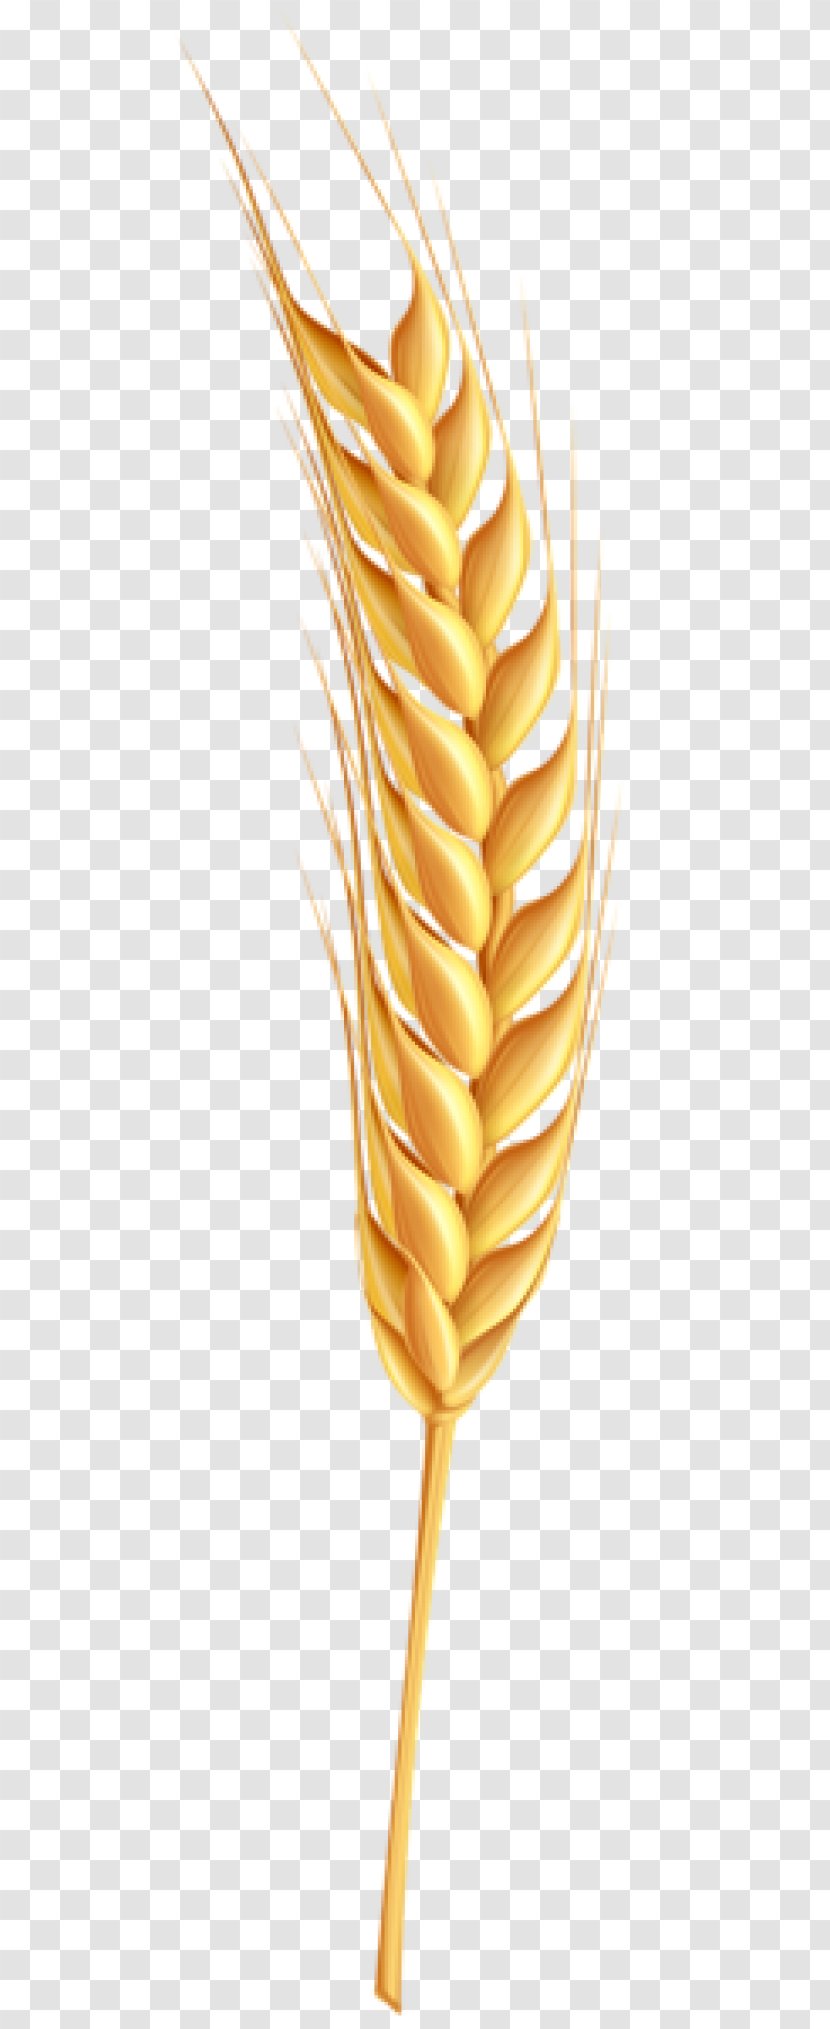 Wheat - Commodity - Lossless Compression Transparent PNG